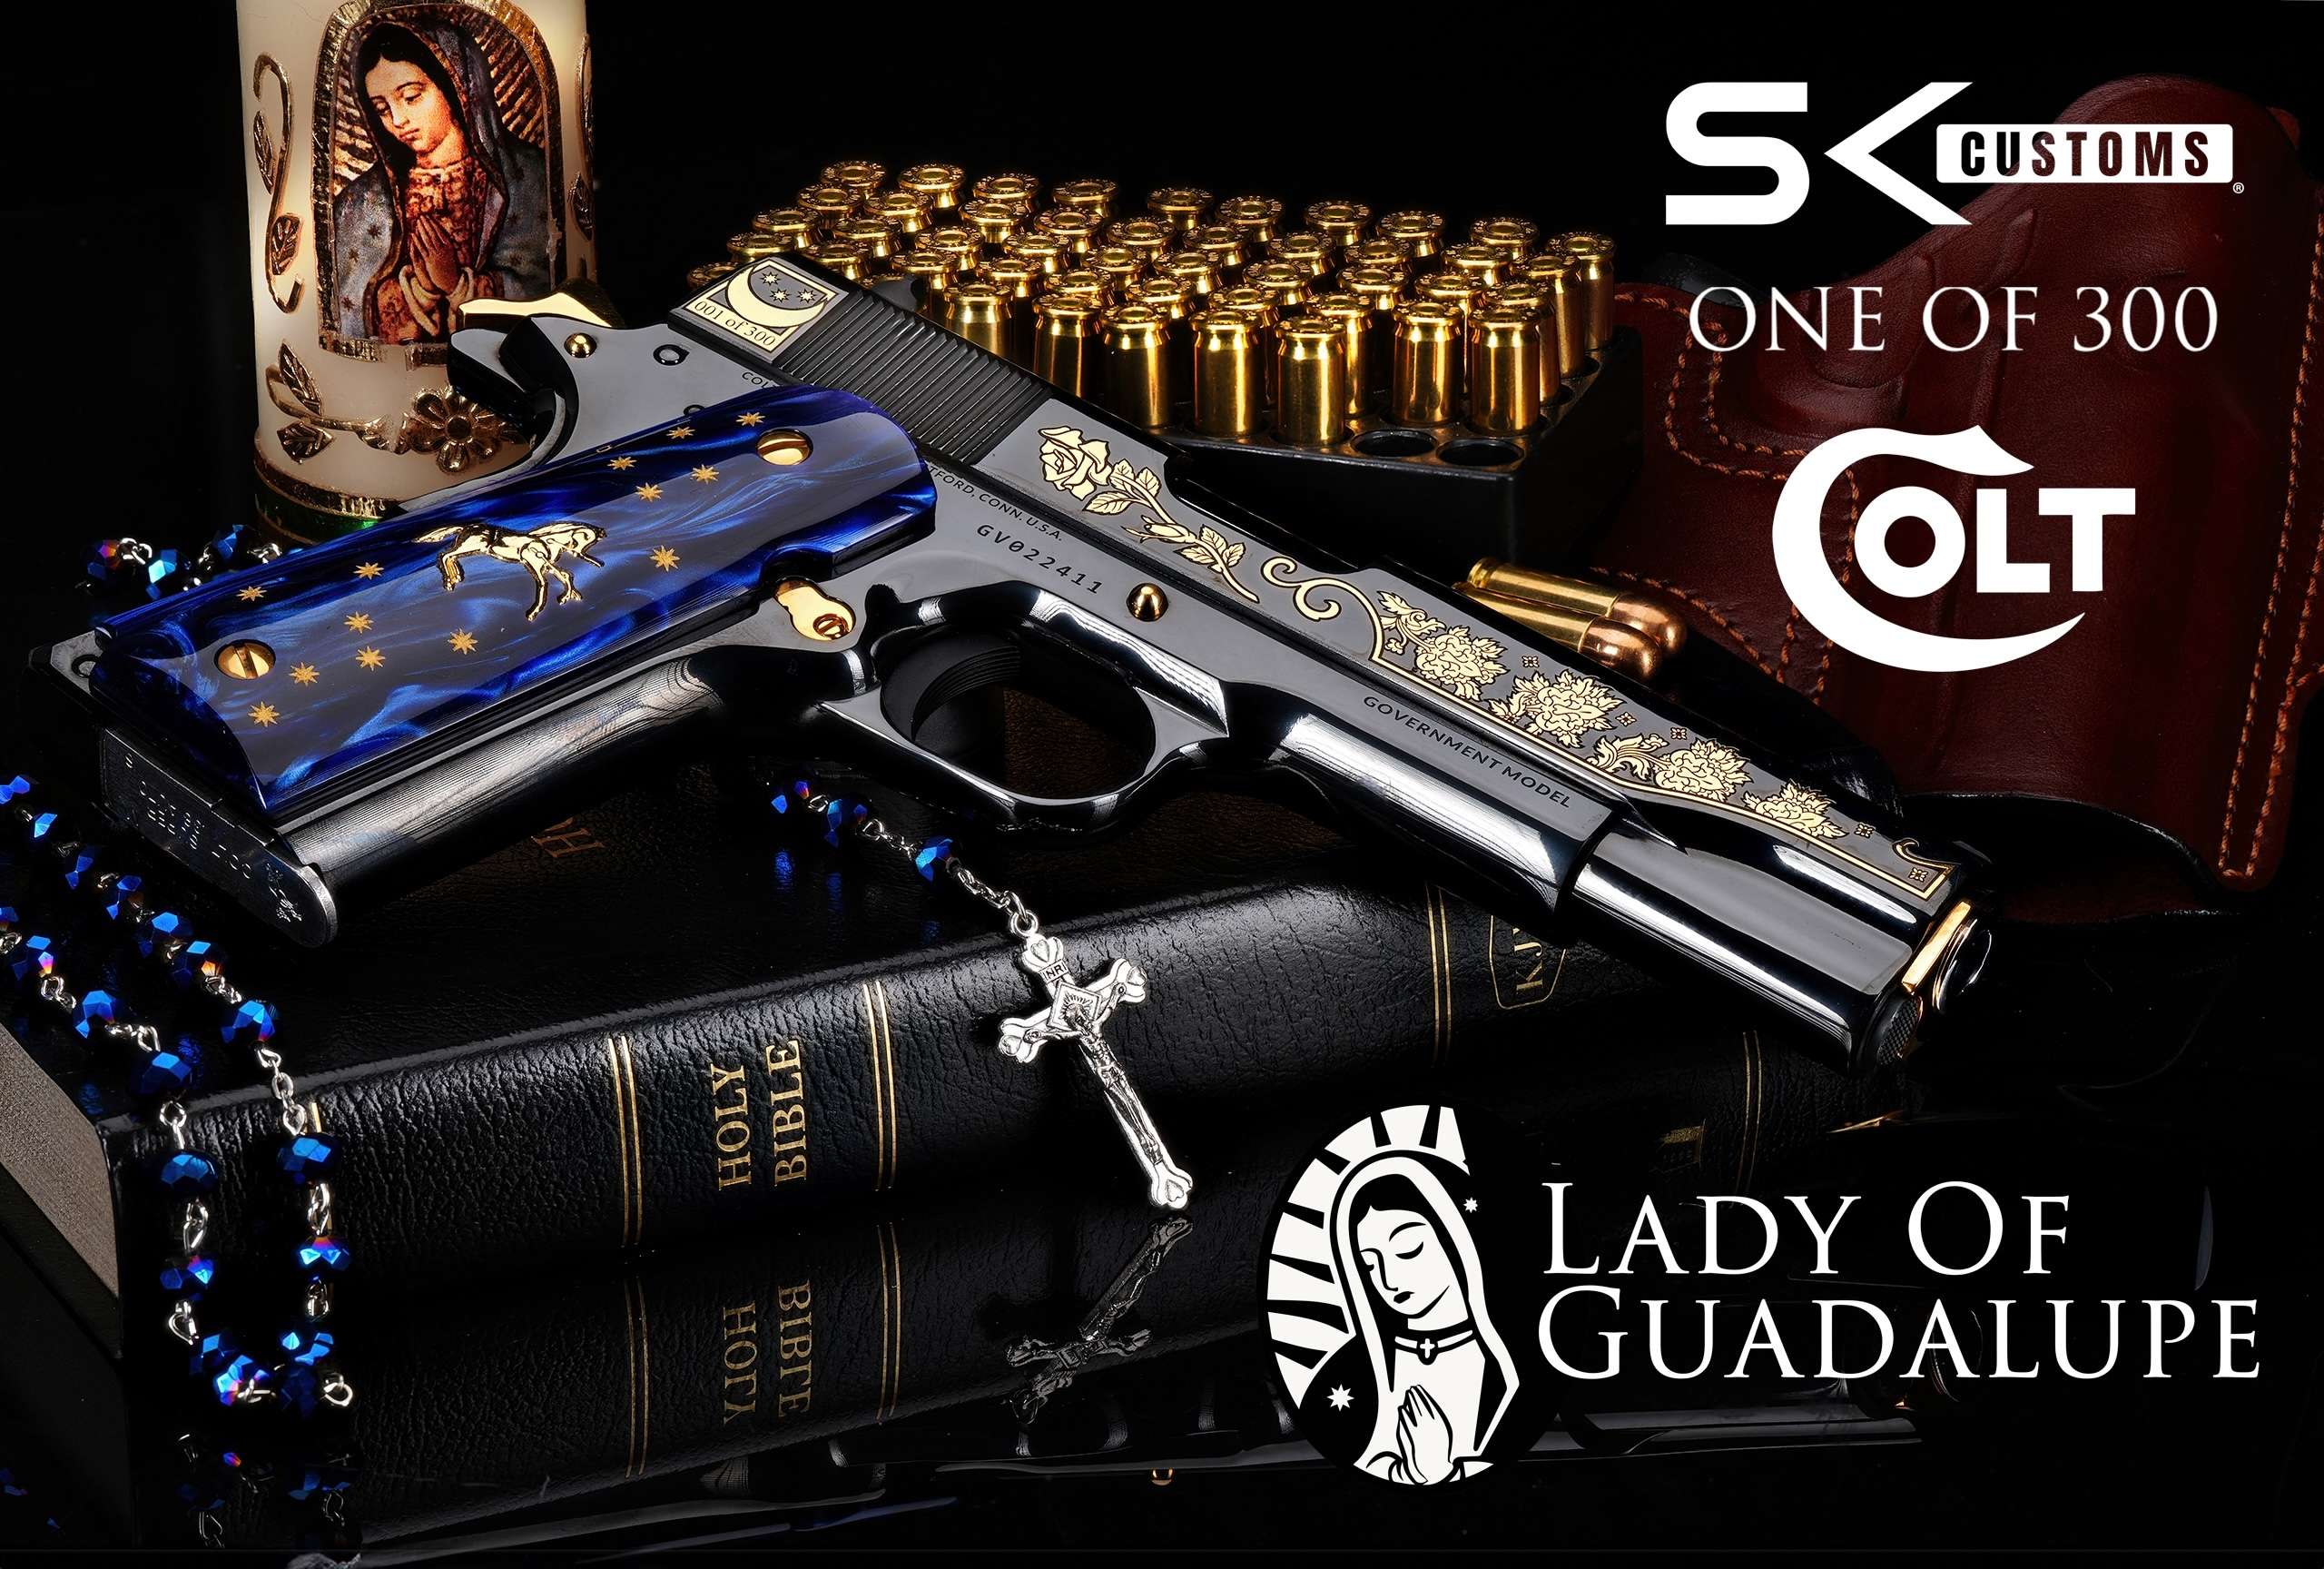 SK CUSTOMS COLT 1911 38 Super LADY OF GUADALUPE  #074 OF 300-img-0